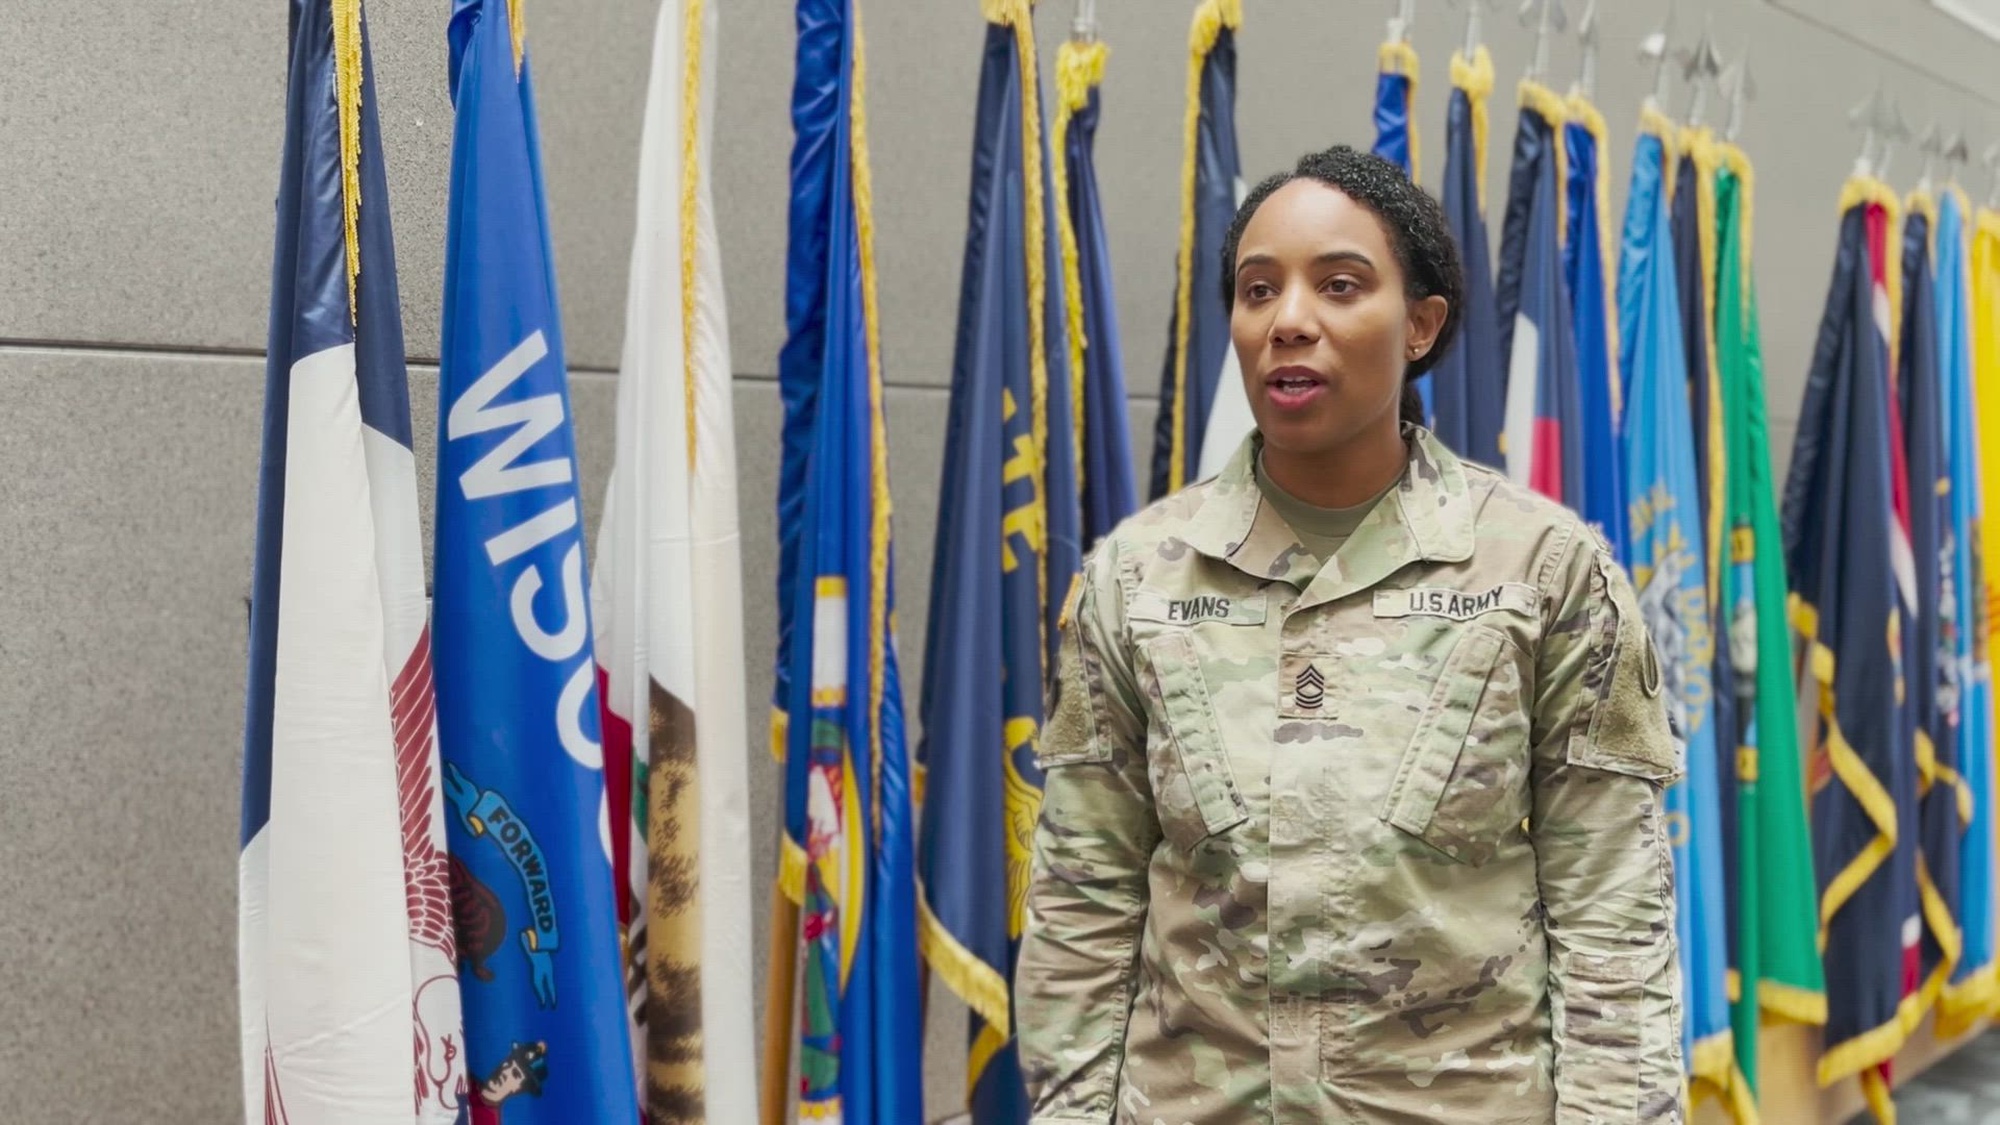 Master Sgt. Ebony Evans, Senior Financial Manager, 85th U.S. Army Reserve Support Command, shares her story of service and why she serves.
(U.S. Army Reserve video by Staff Sgt. Erika Whitaker)